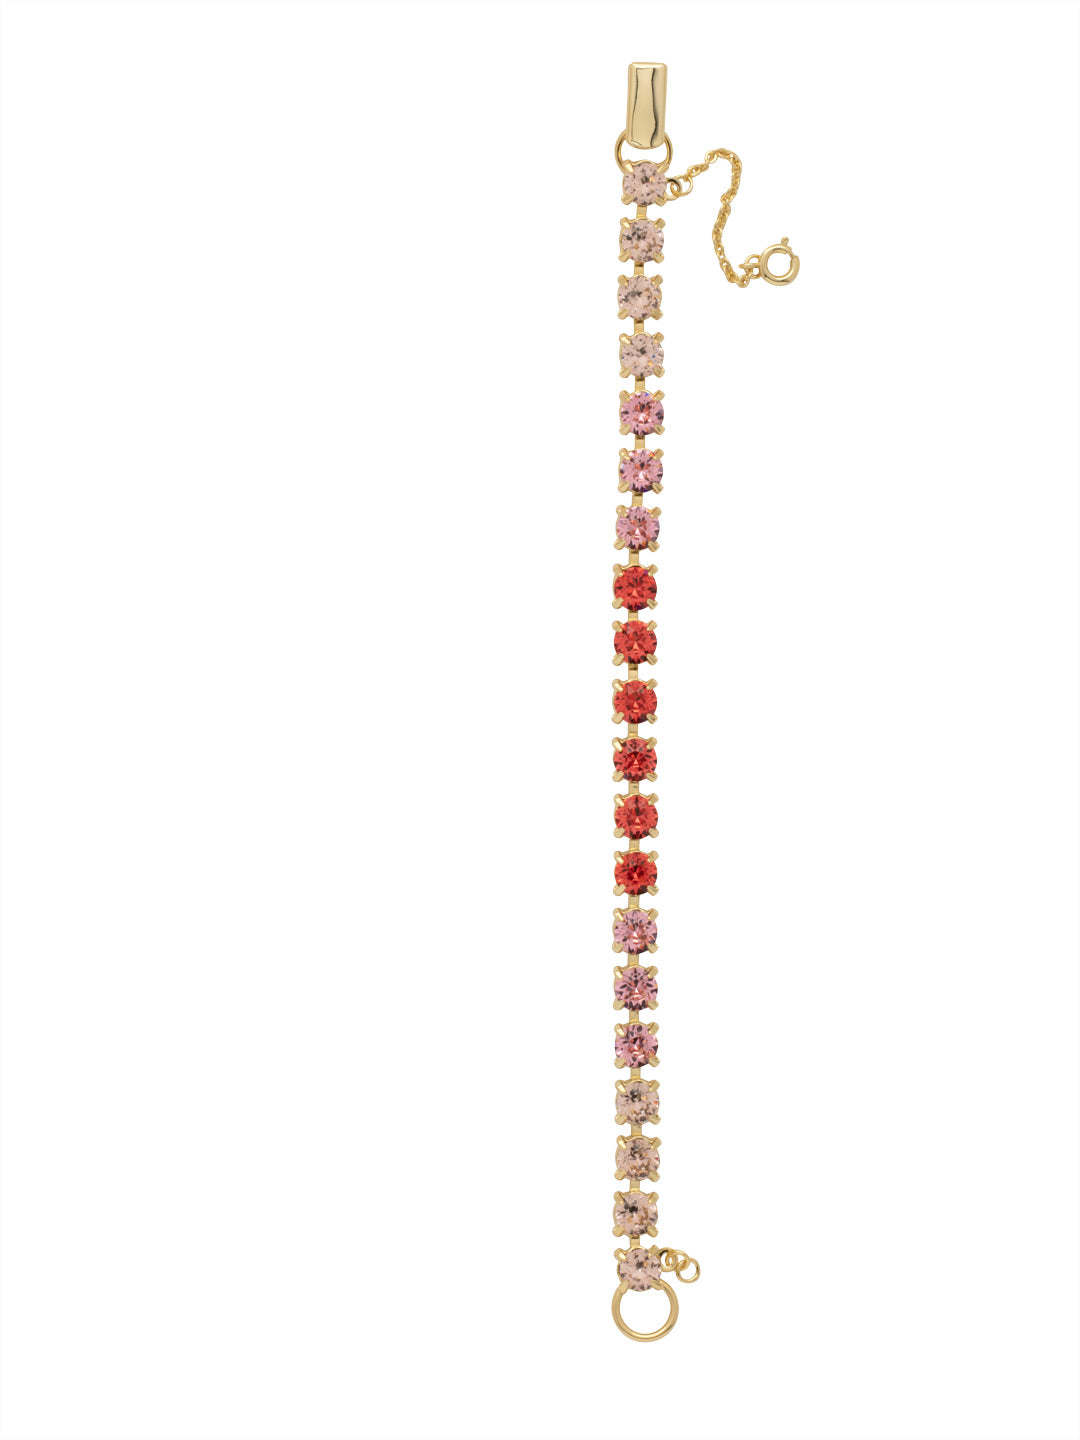 Elsie Tennis Bracelet - BEZ30BGFSK - <p>The Elsie Tennis Bracelet is a classic style that can be worn everywhere. A line of round cut crystals wraps around the full length of the bracelet and secures with a fold-over clasp. From Sorrelli's First Kiss collection in our Bright Gold-tone finish.</p>